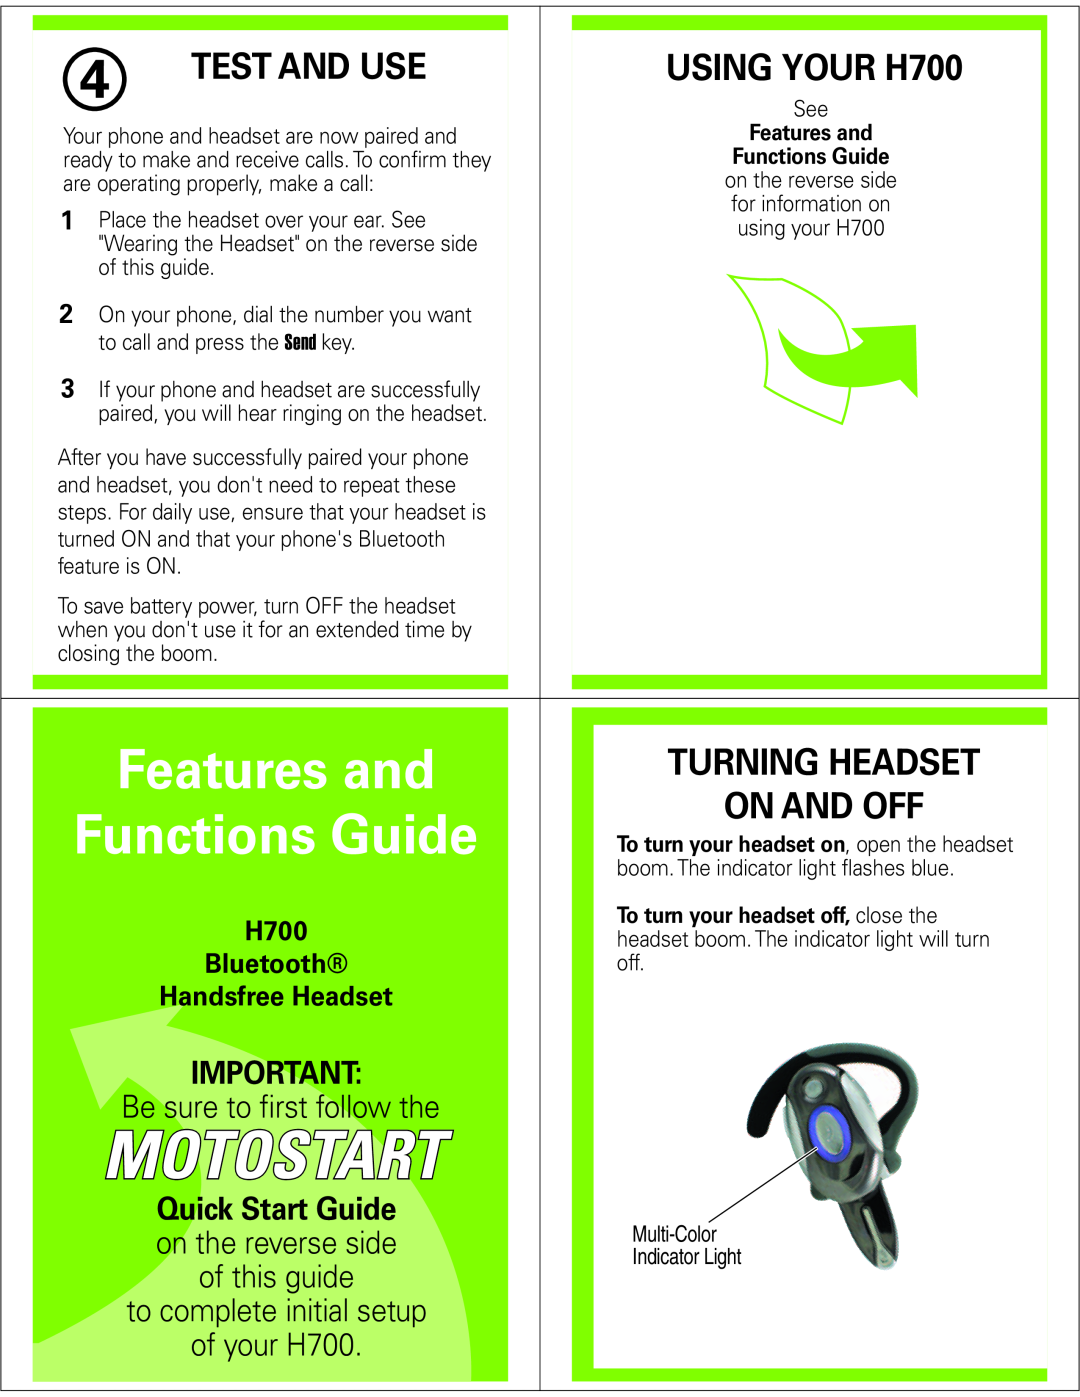 Motorola Test And Use, On And Off, Turning Headset, USING YOUR H700, Quick Start Guide, Handsfree Headset, Features and 